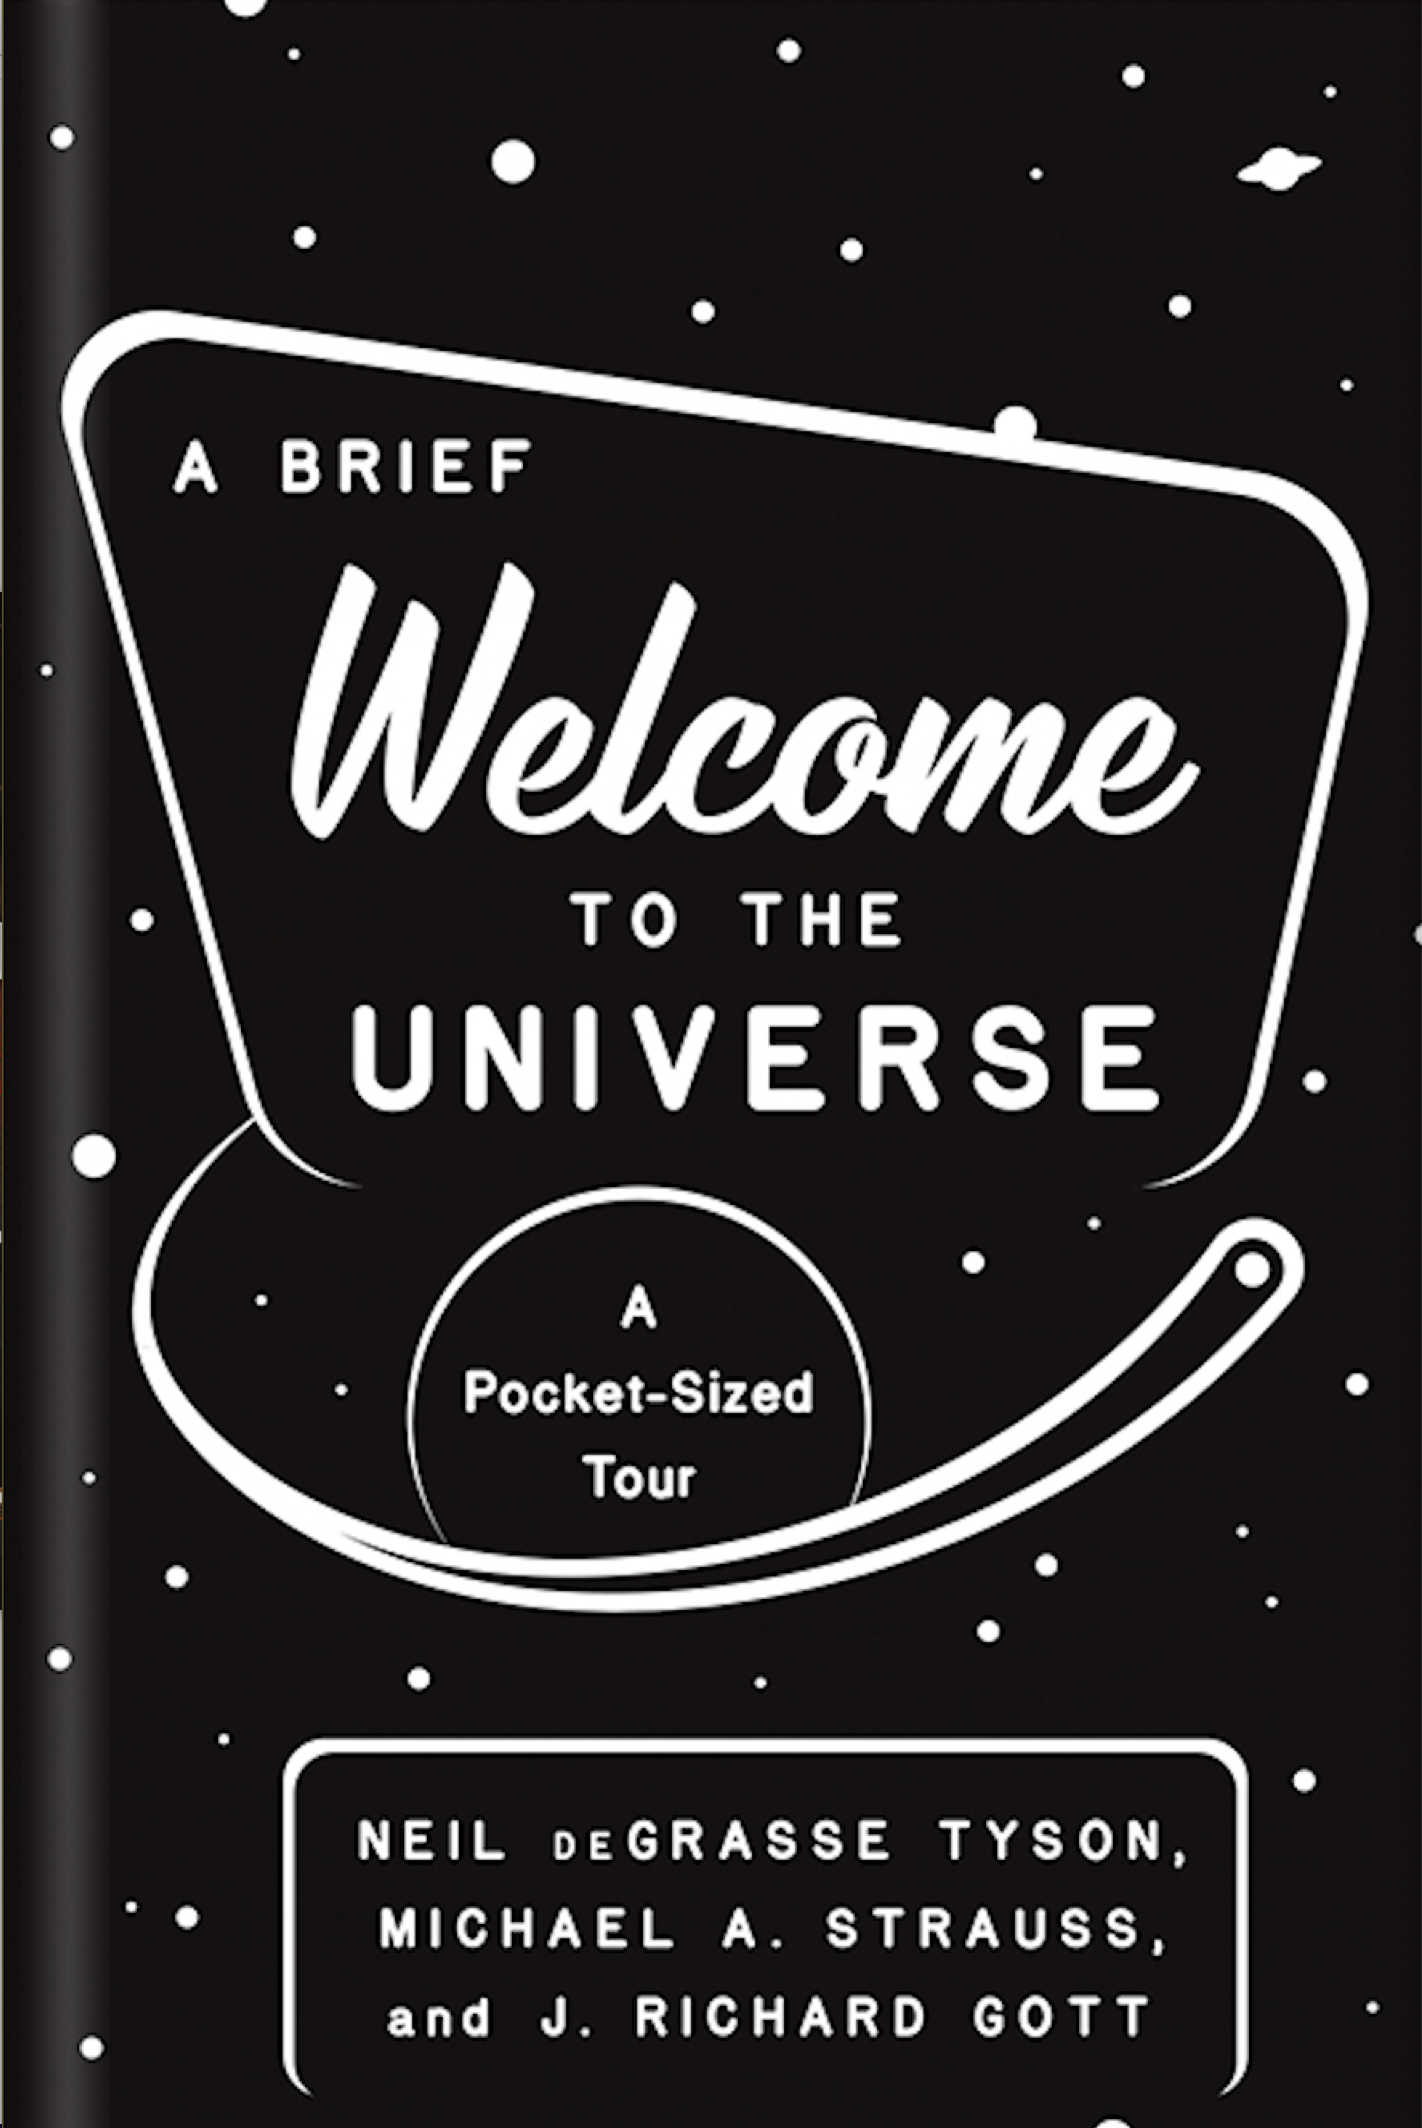 Link to the book A Brief Welcome to the Universe by Neil deGrasse Tyson, Michael Strauss, and J. Richard Gott.